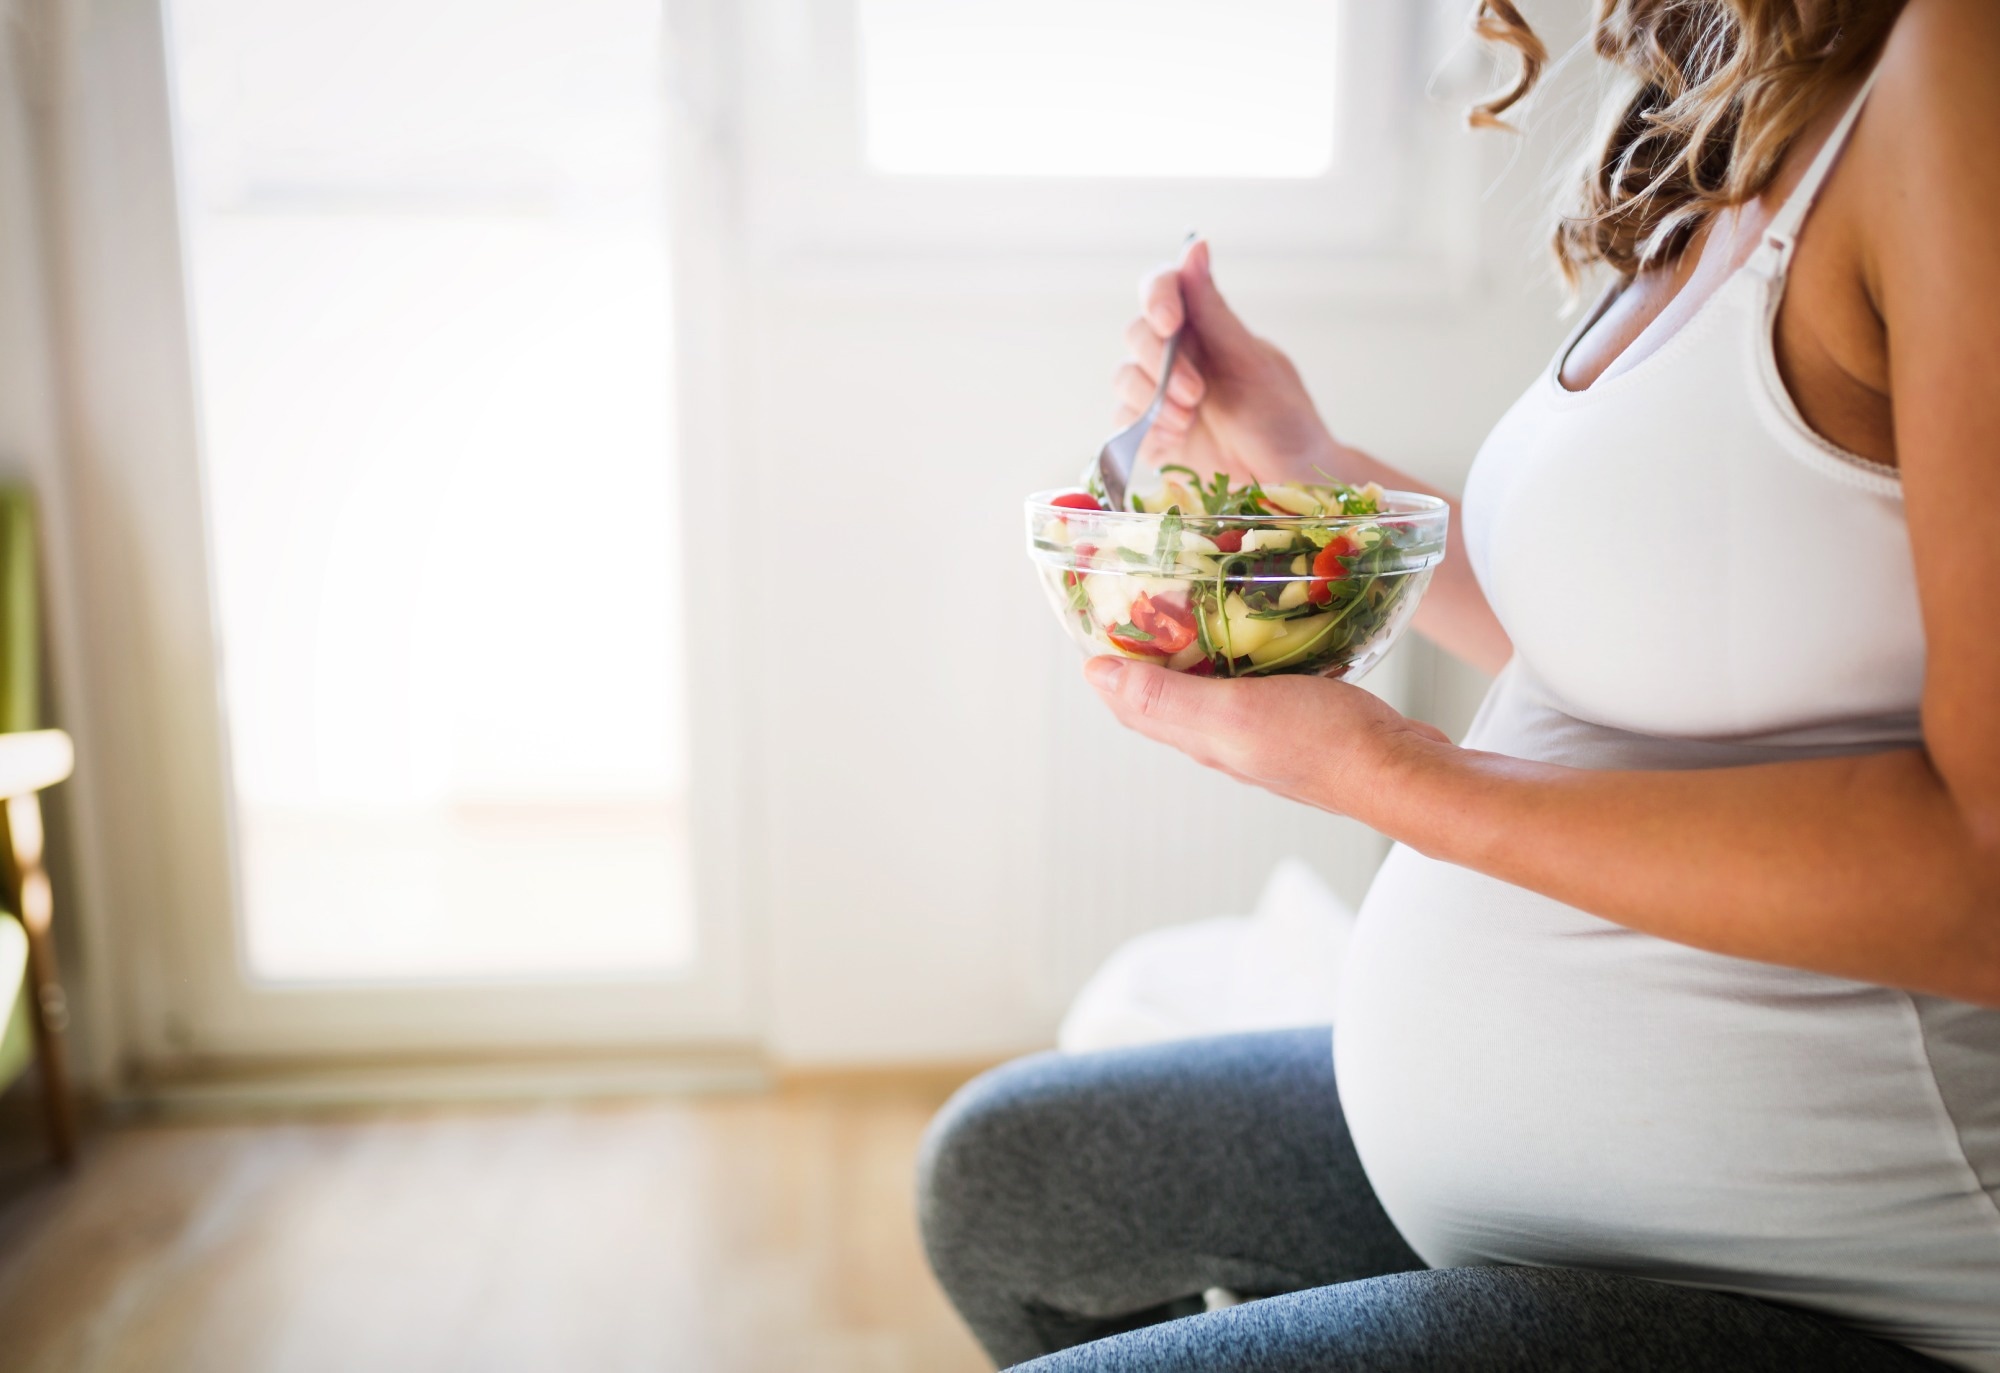 Study: Association between the maternal mediterranean diet and perinatal outcomes: a systematic review and meta-analysis. Image Credit: NDAB Creativity / Shutterstock.com